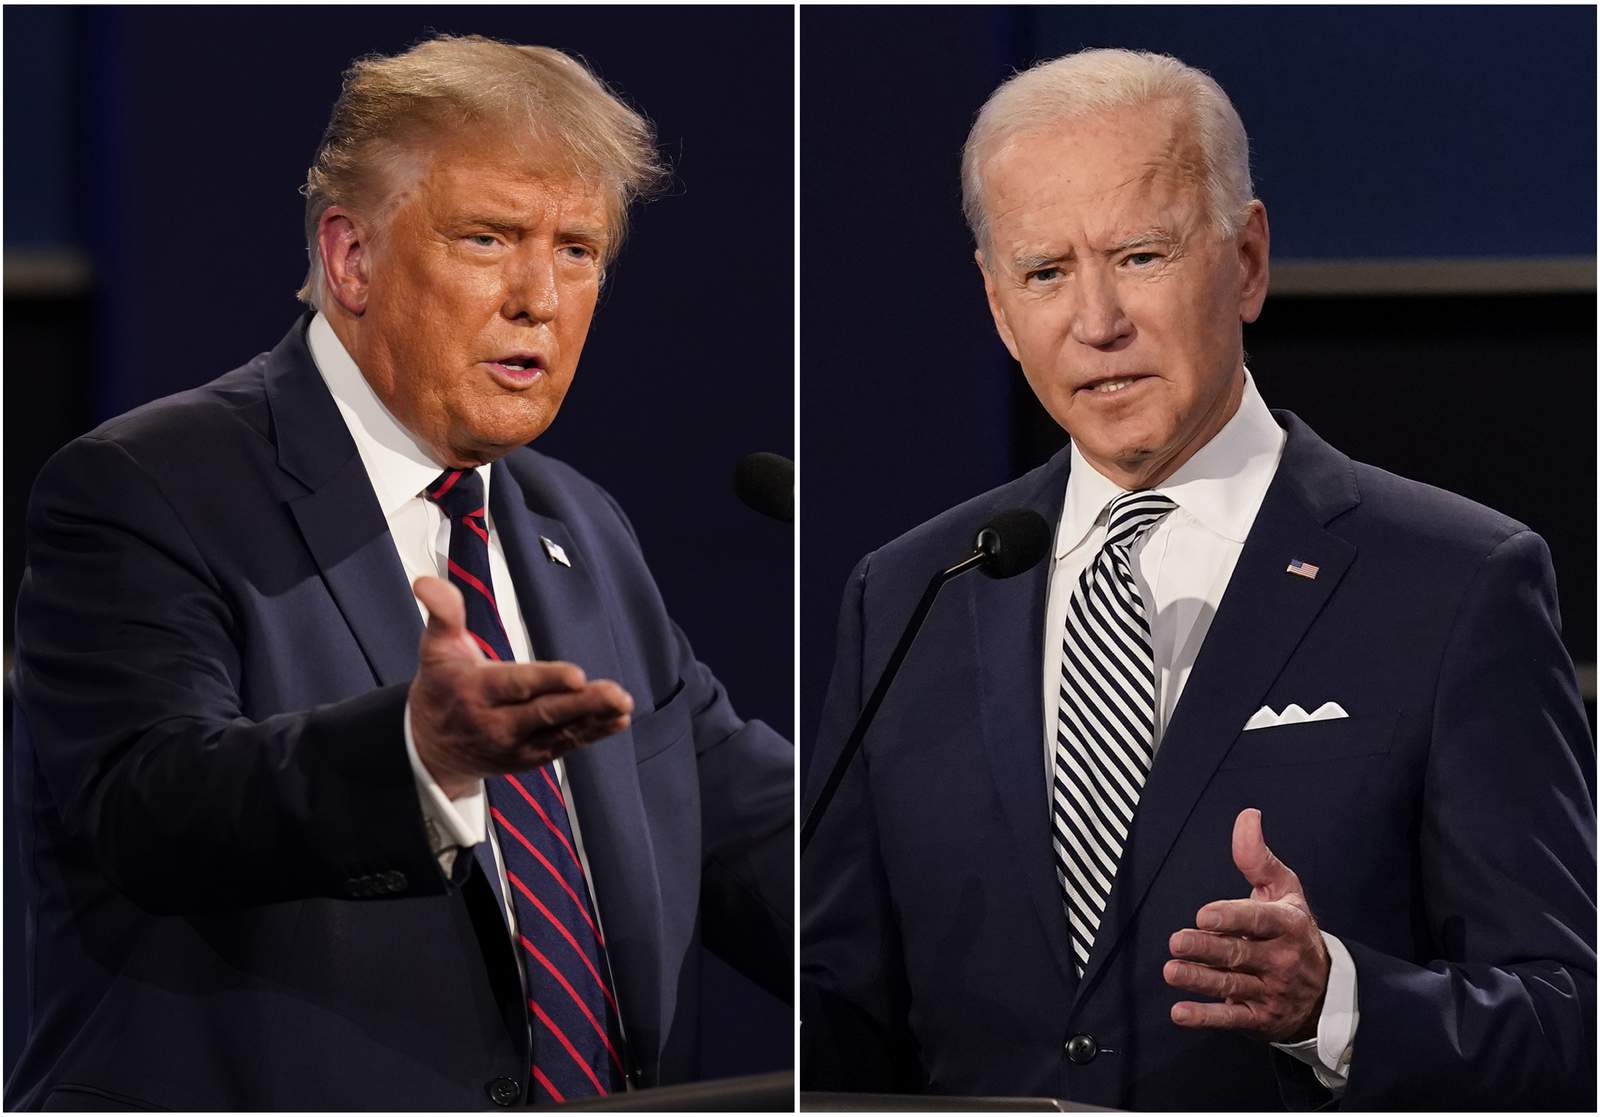 Debate commission adopts new rules to mute microphones during second presidential debate